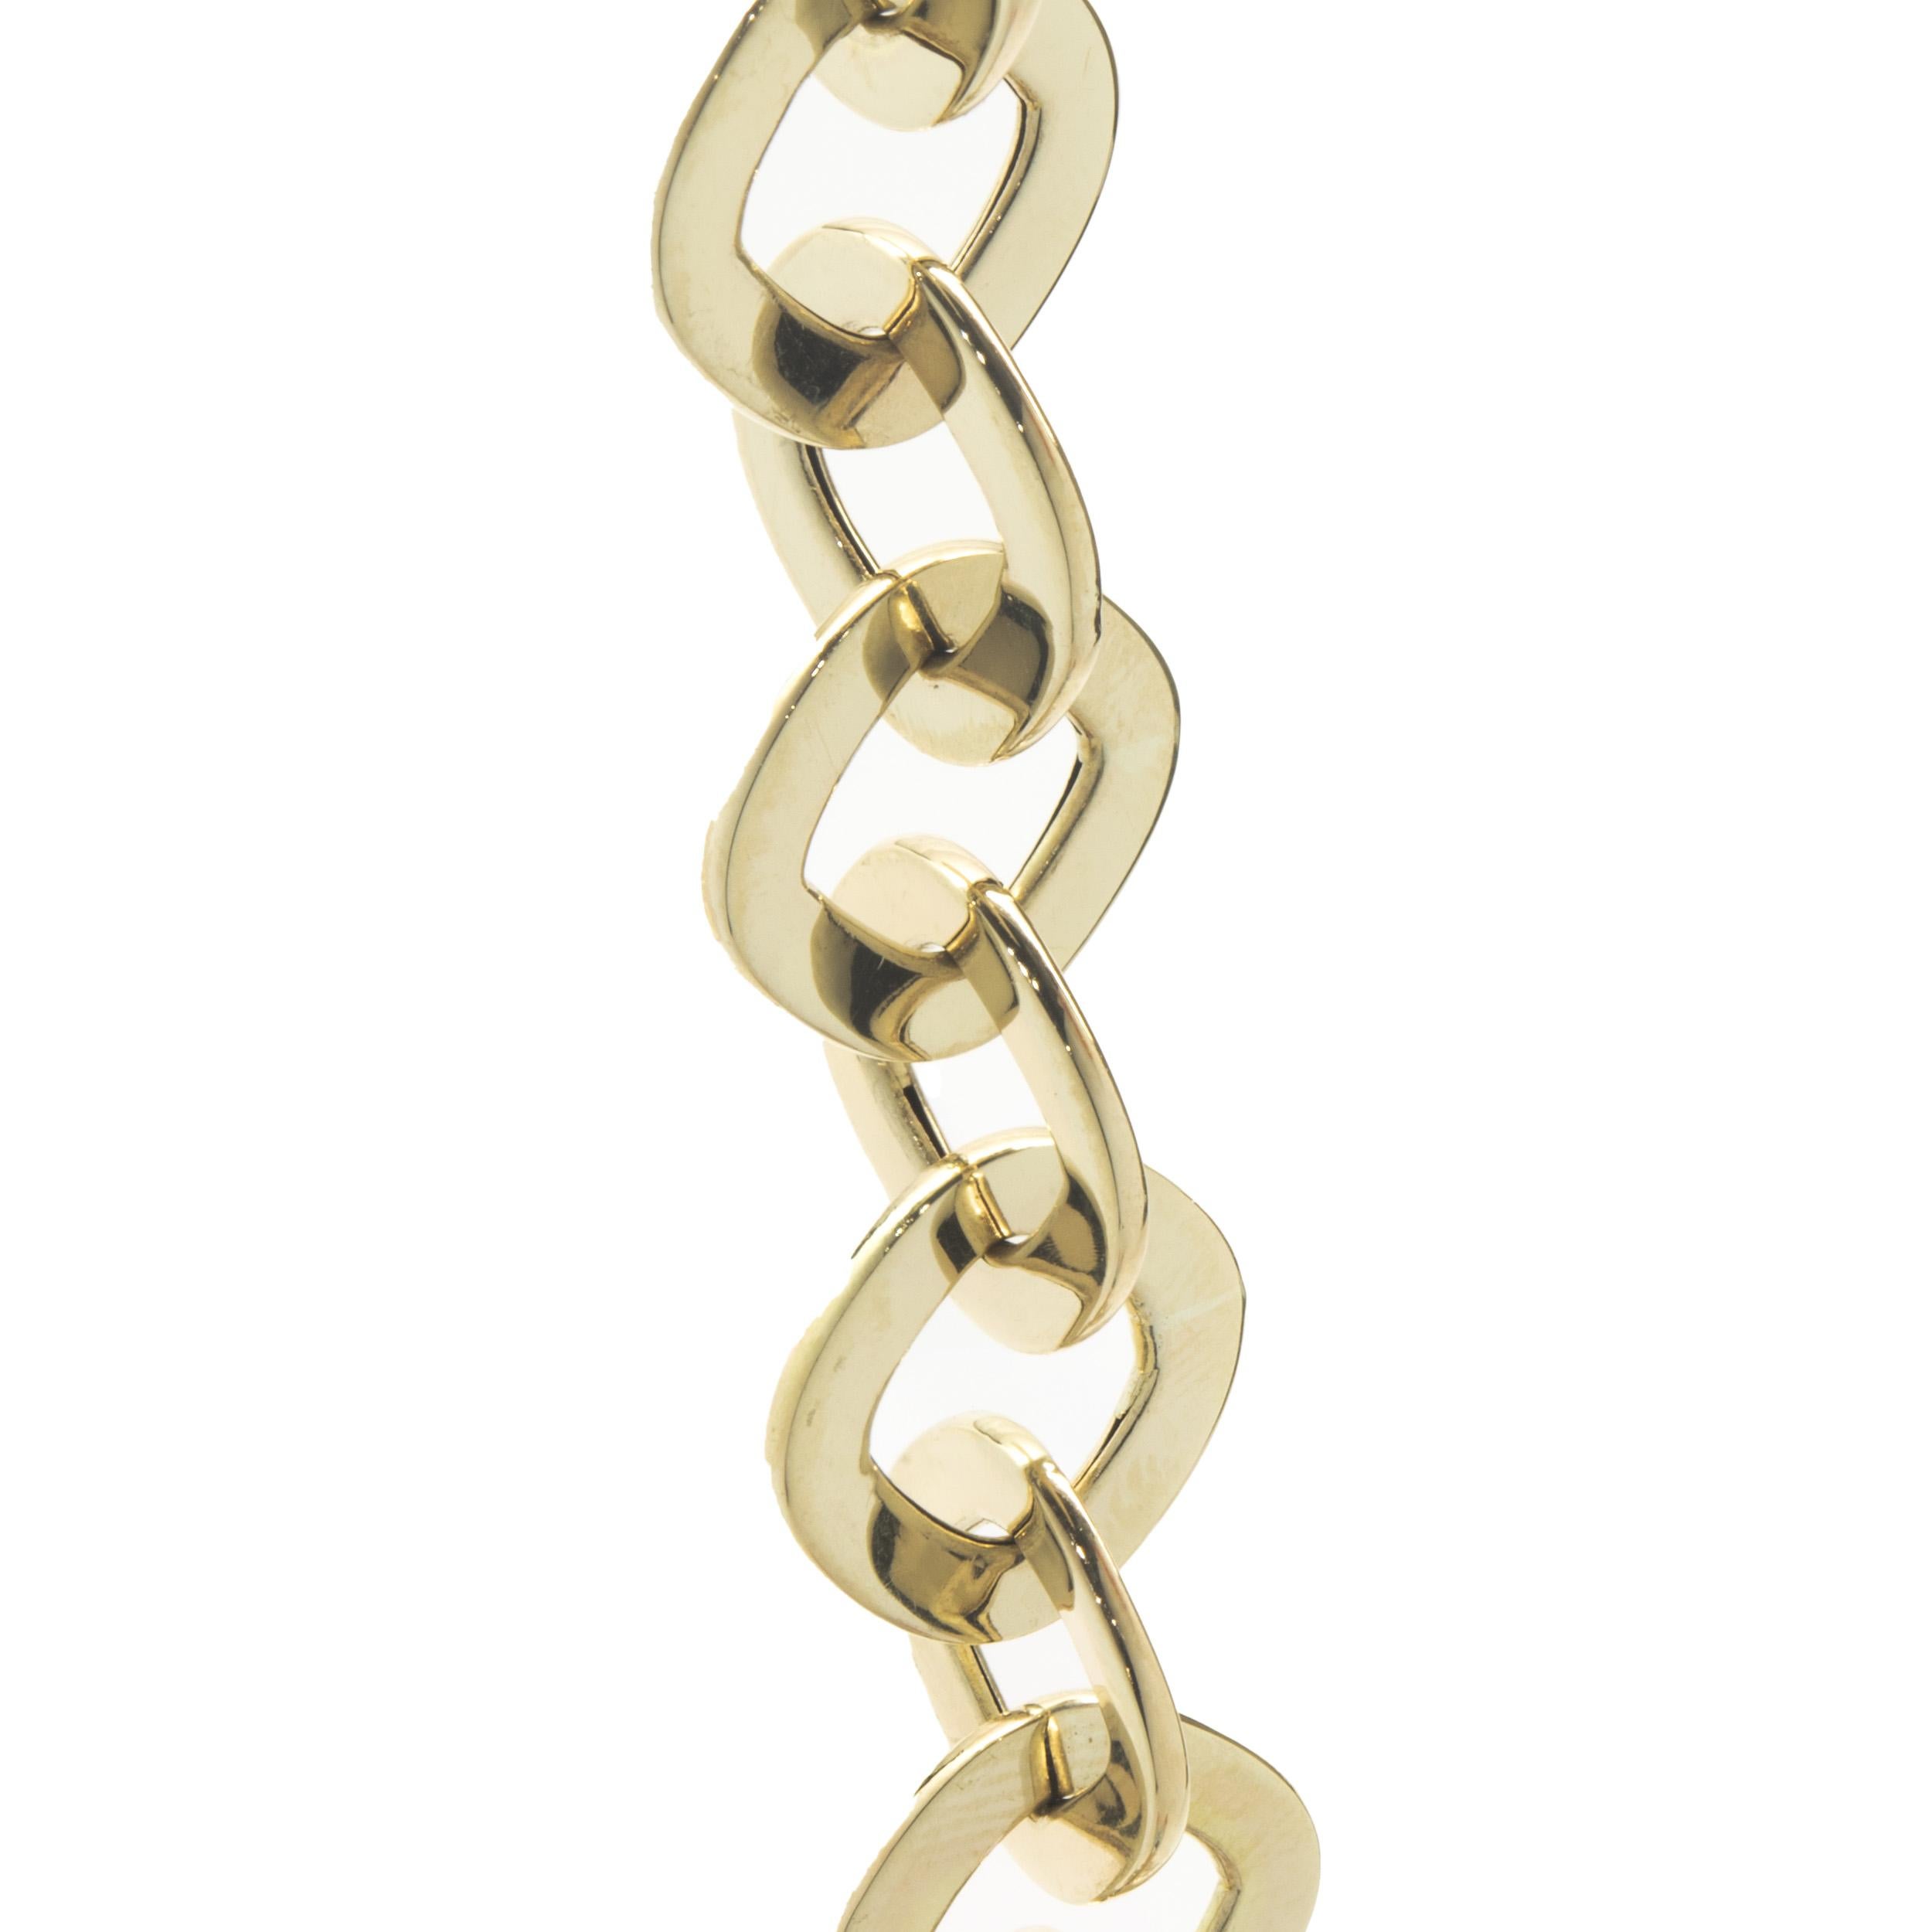 Material: 14K yellow gold
Dimensions: bracelet will fit up to a 7-inch wrist
Weight: 13.35 grams